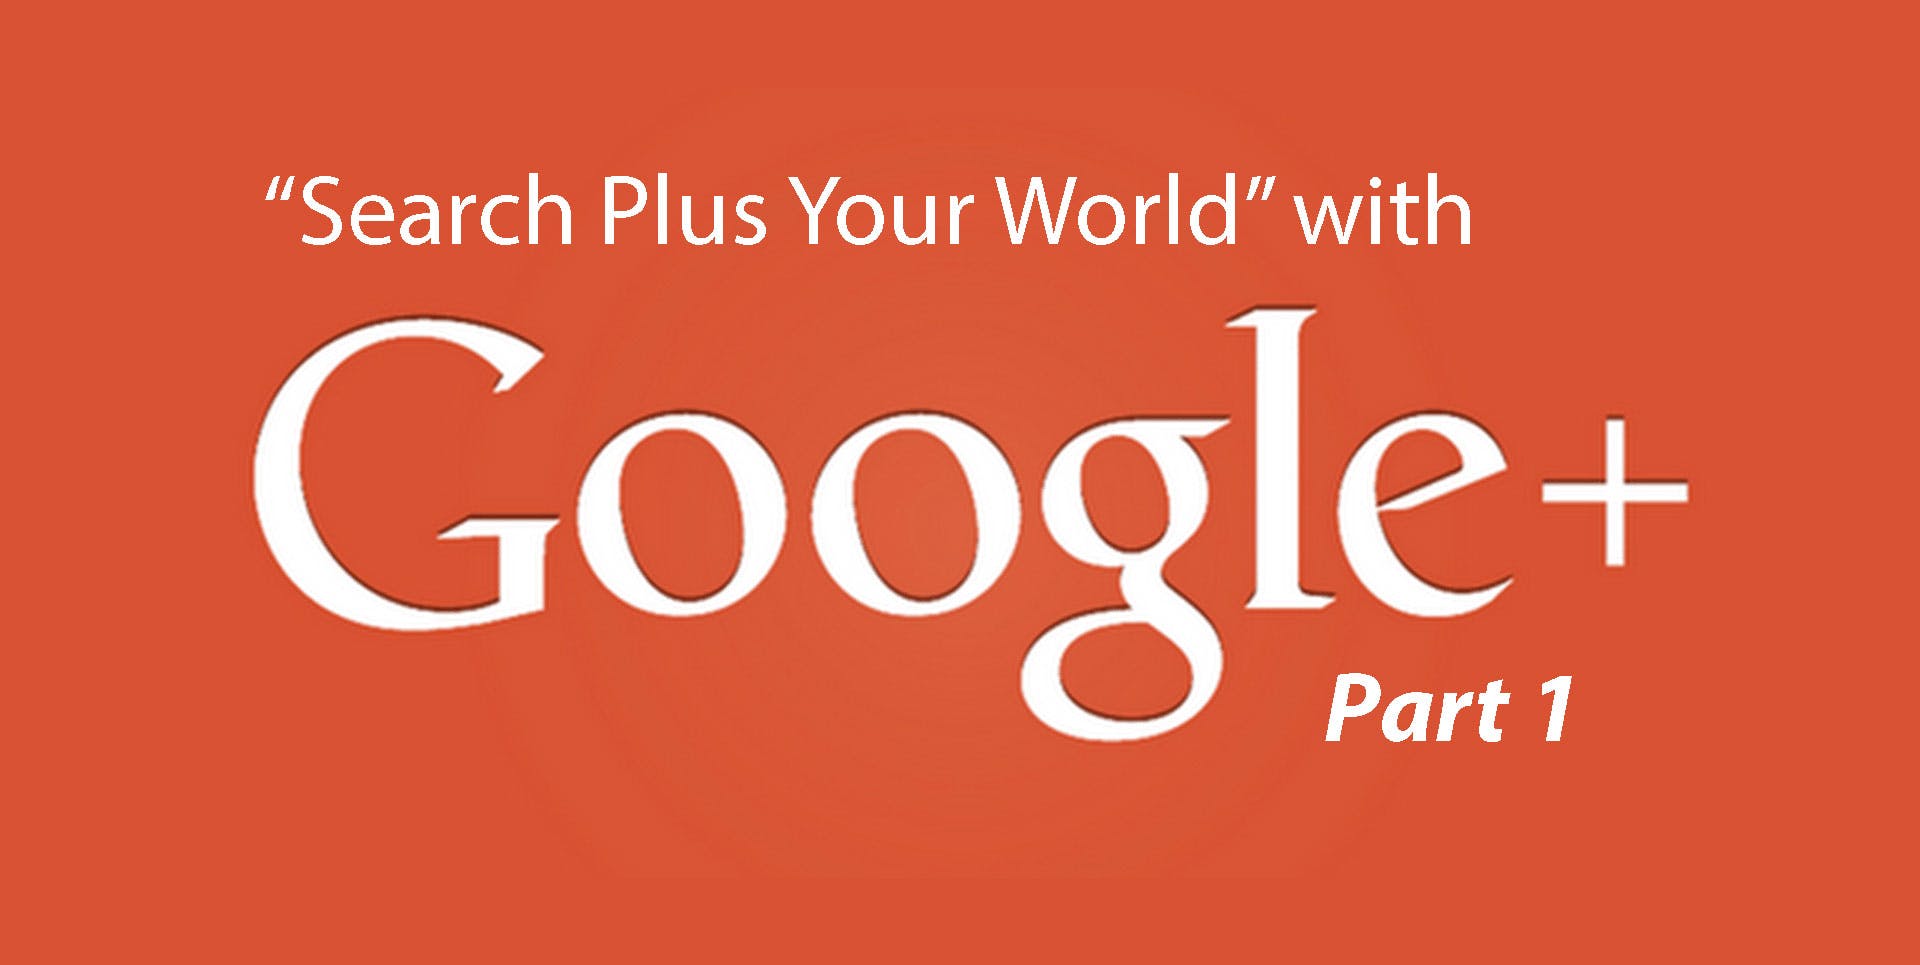 Search Plus Your World with Google + Part 1